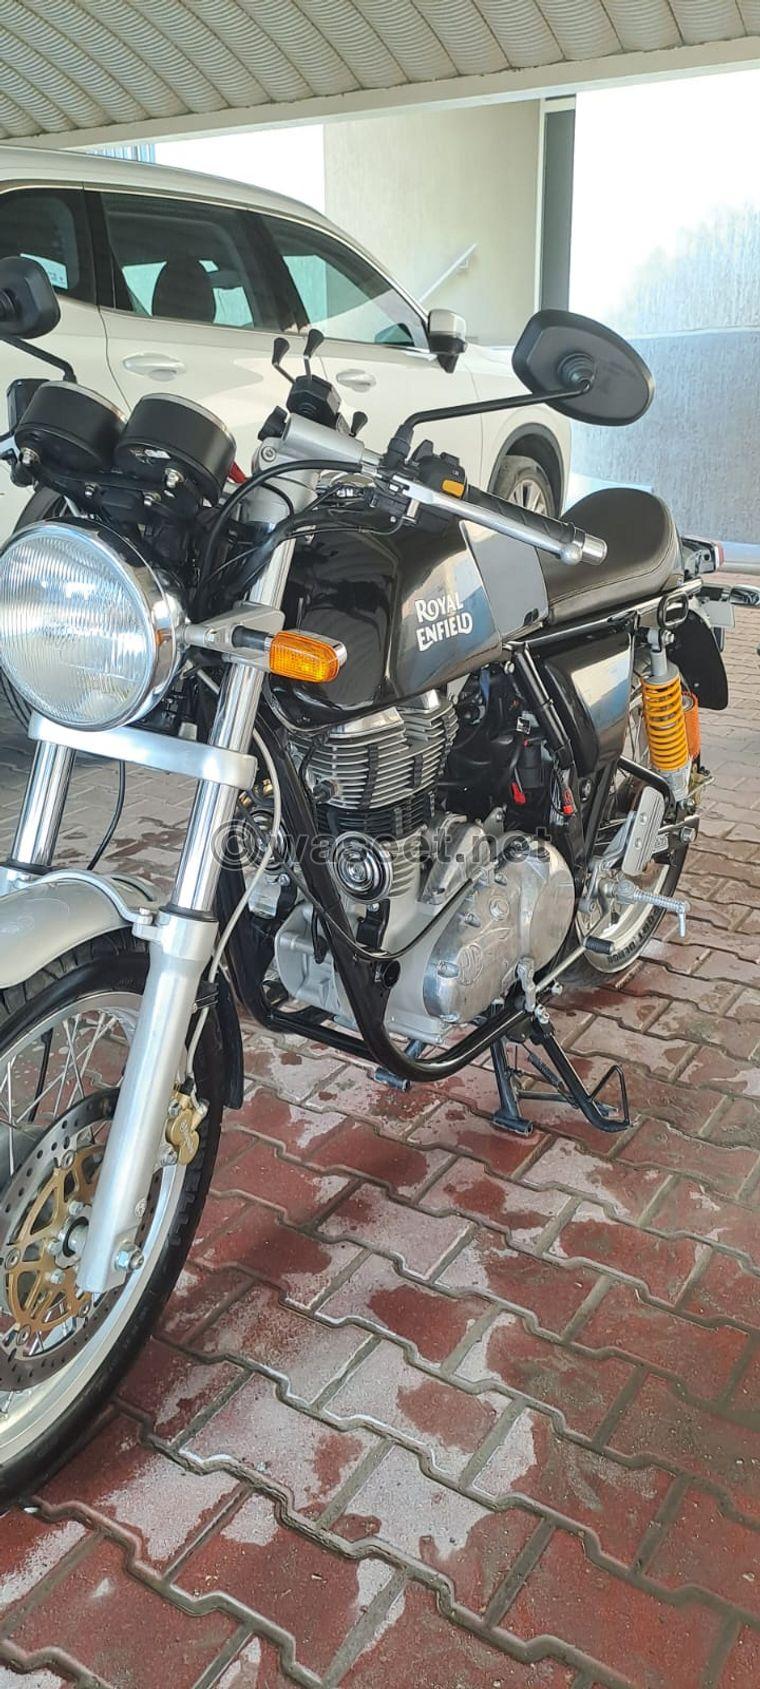 For sale immediately 2018 Royal Enfield Continental GT 535, like new 3